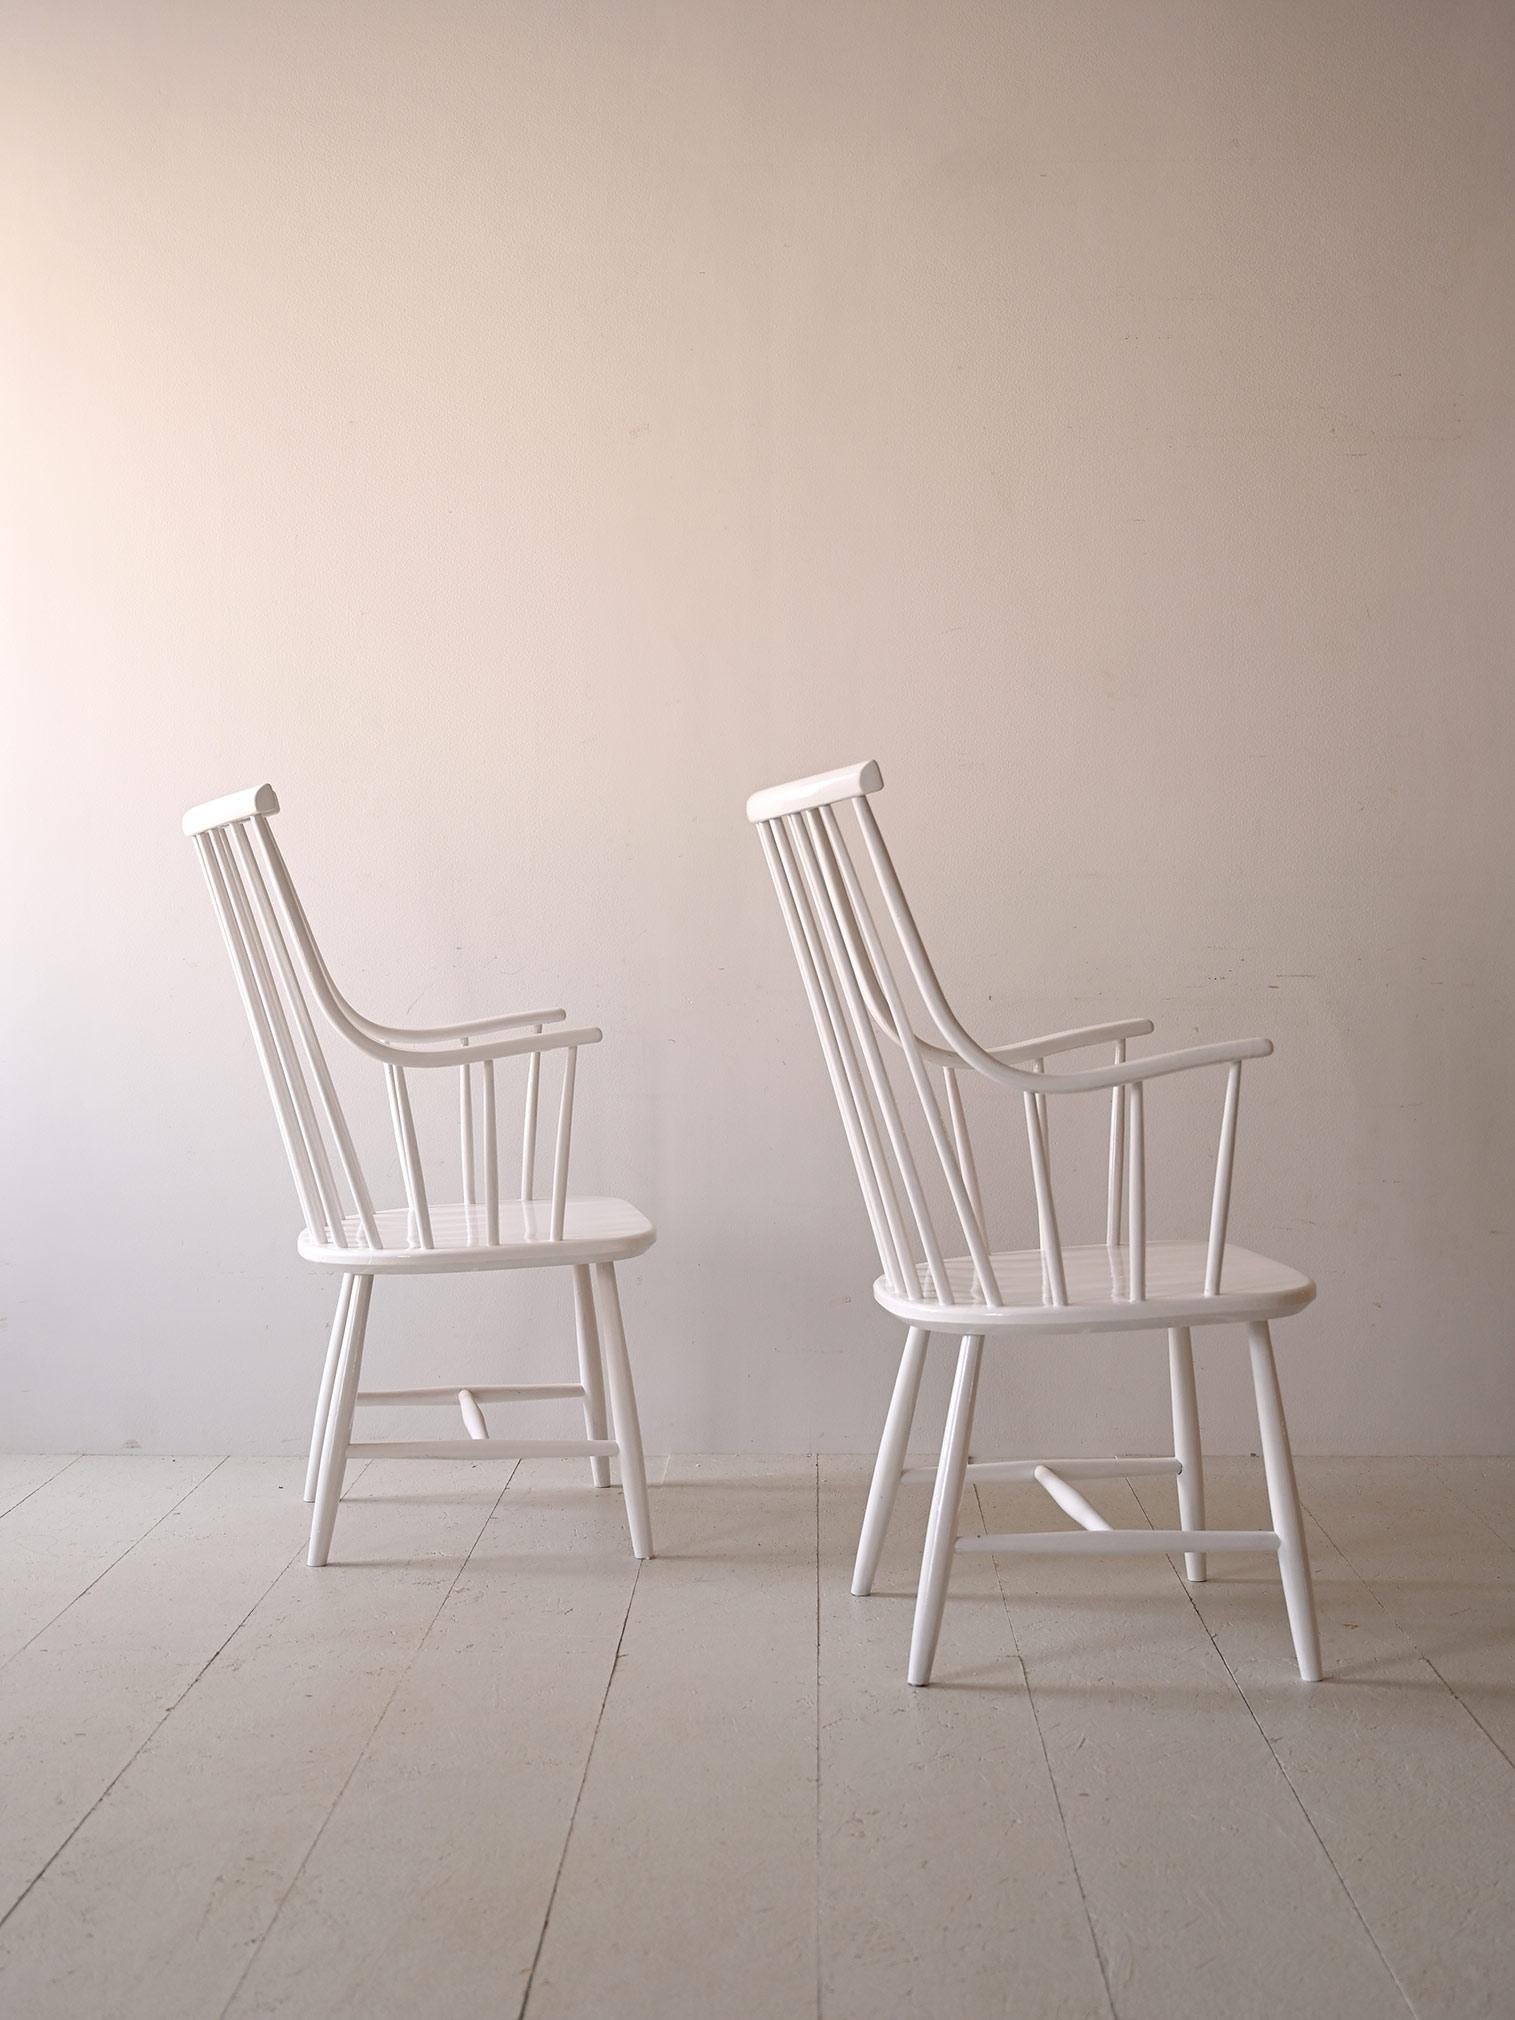 Scandinavian Modern Pair of chairs designed by Lena Larsson model 